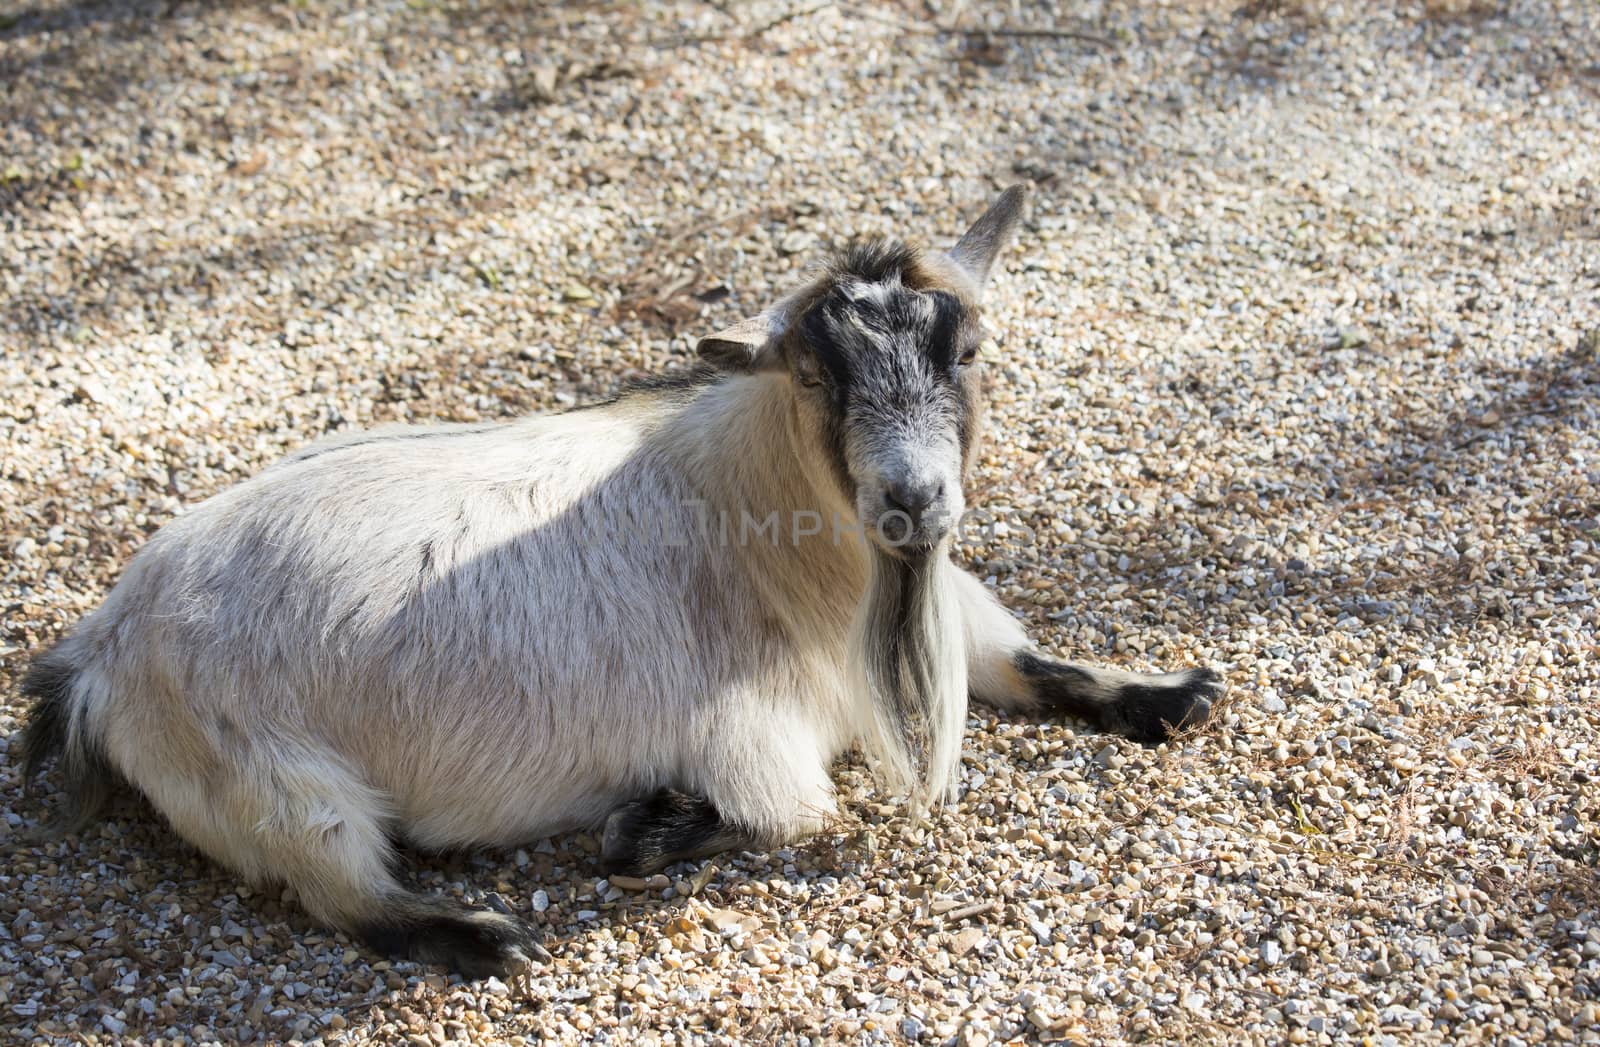 Goat lying on the ground